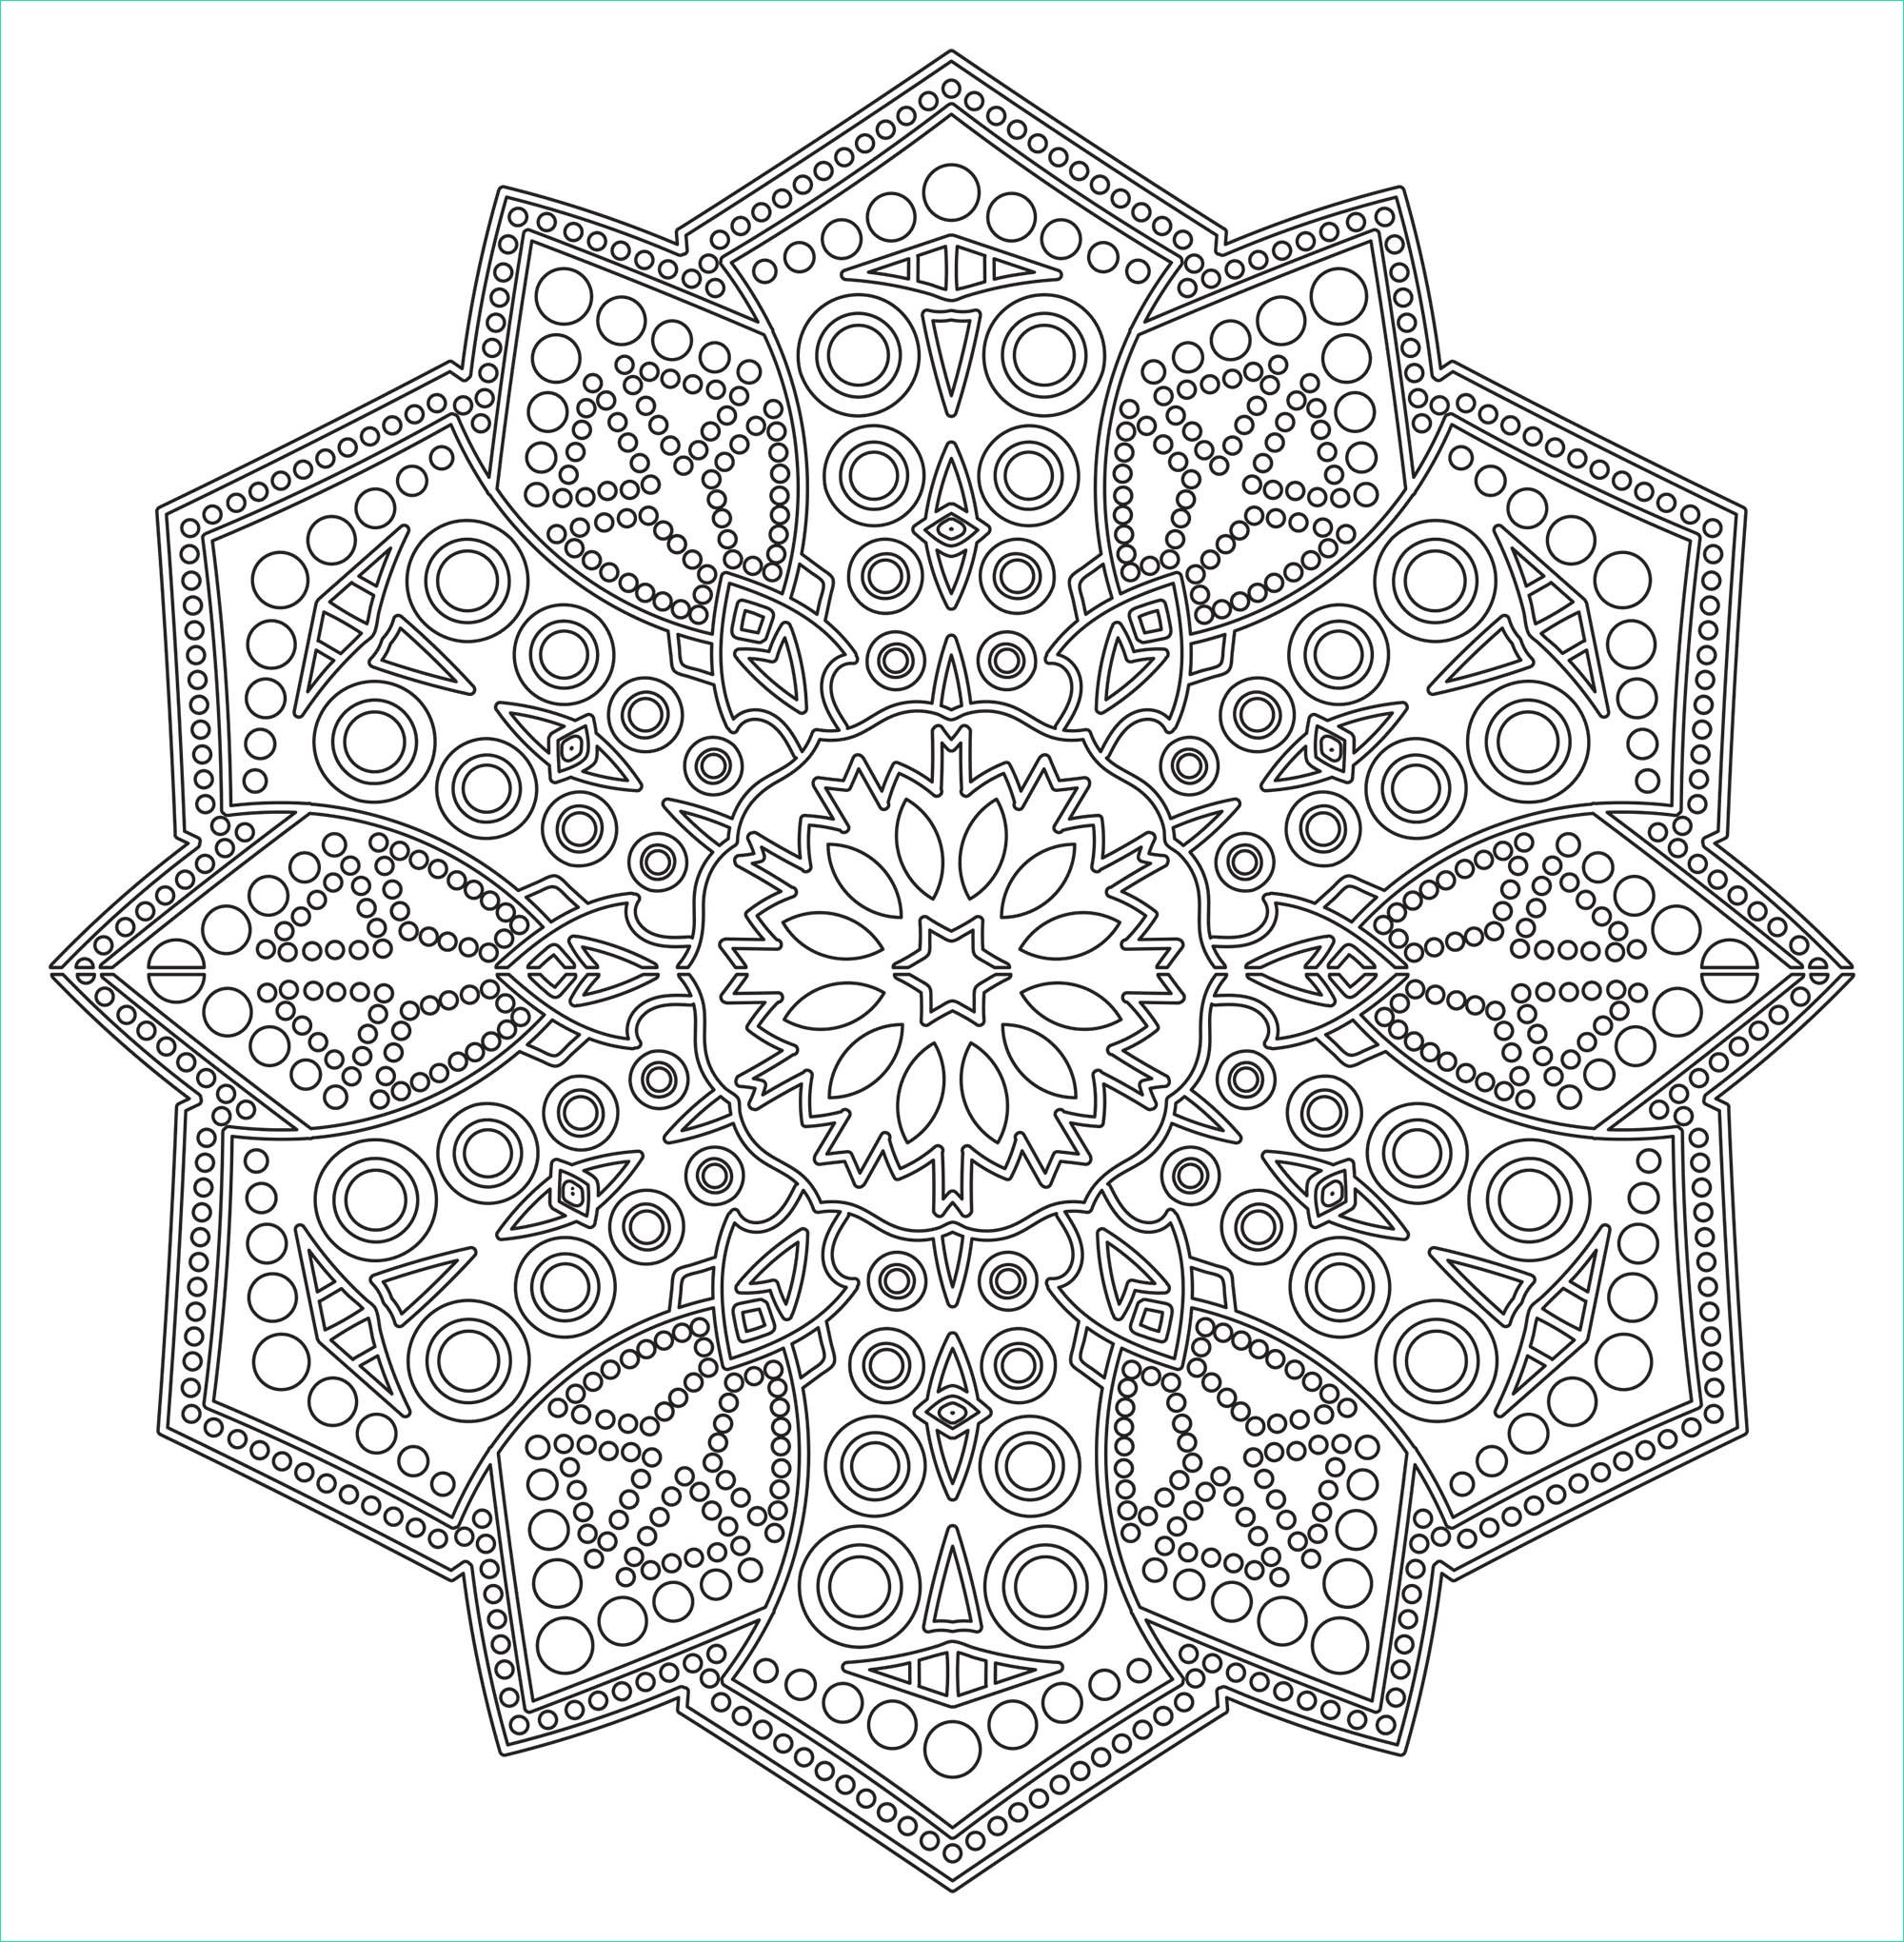 image=very difficult coloring mandala zen antistress lace 1